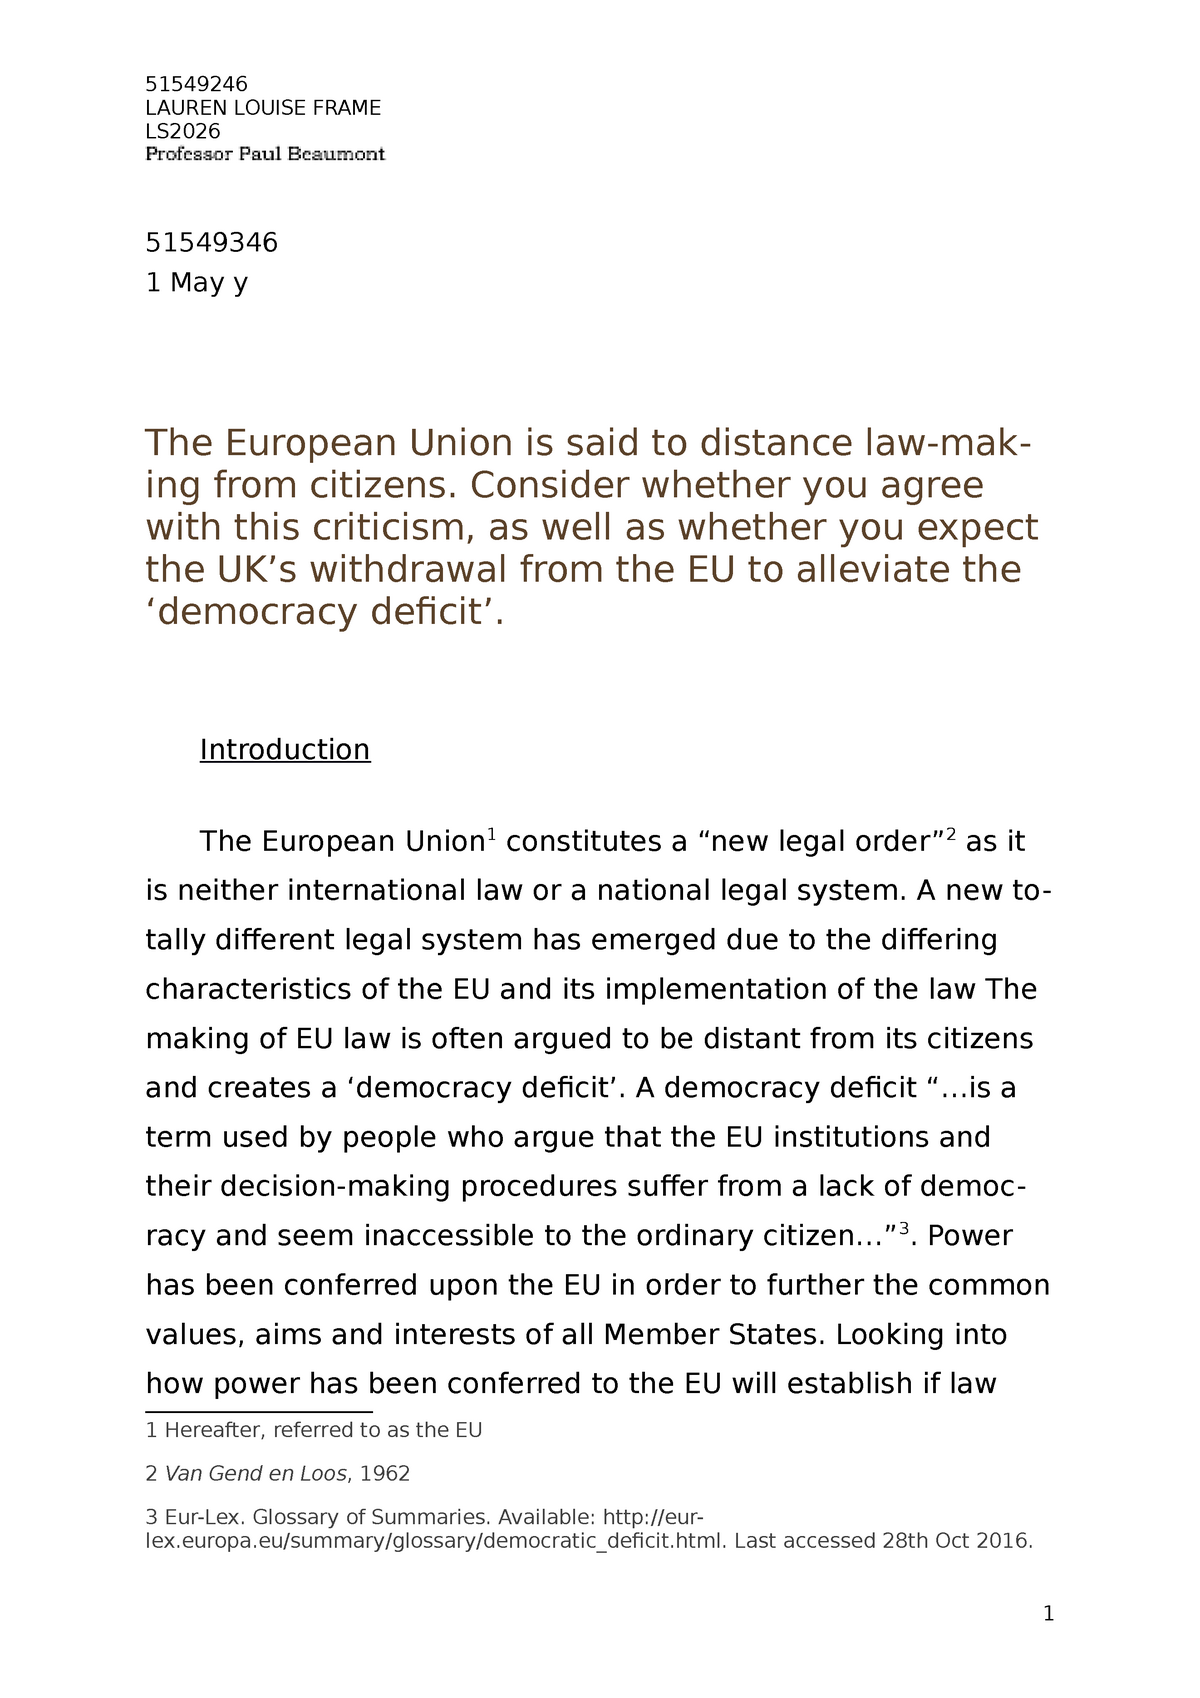 reflection essay about democracy